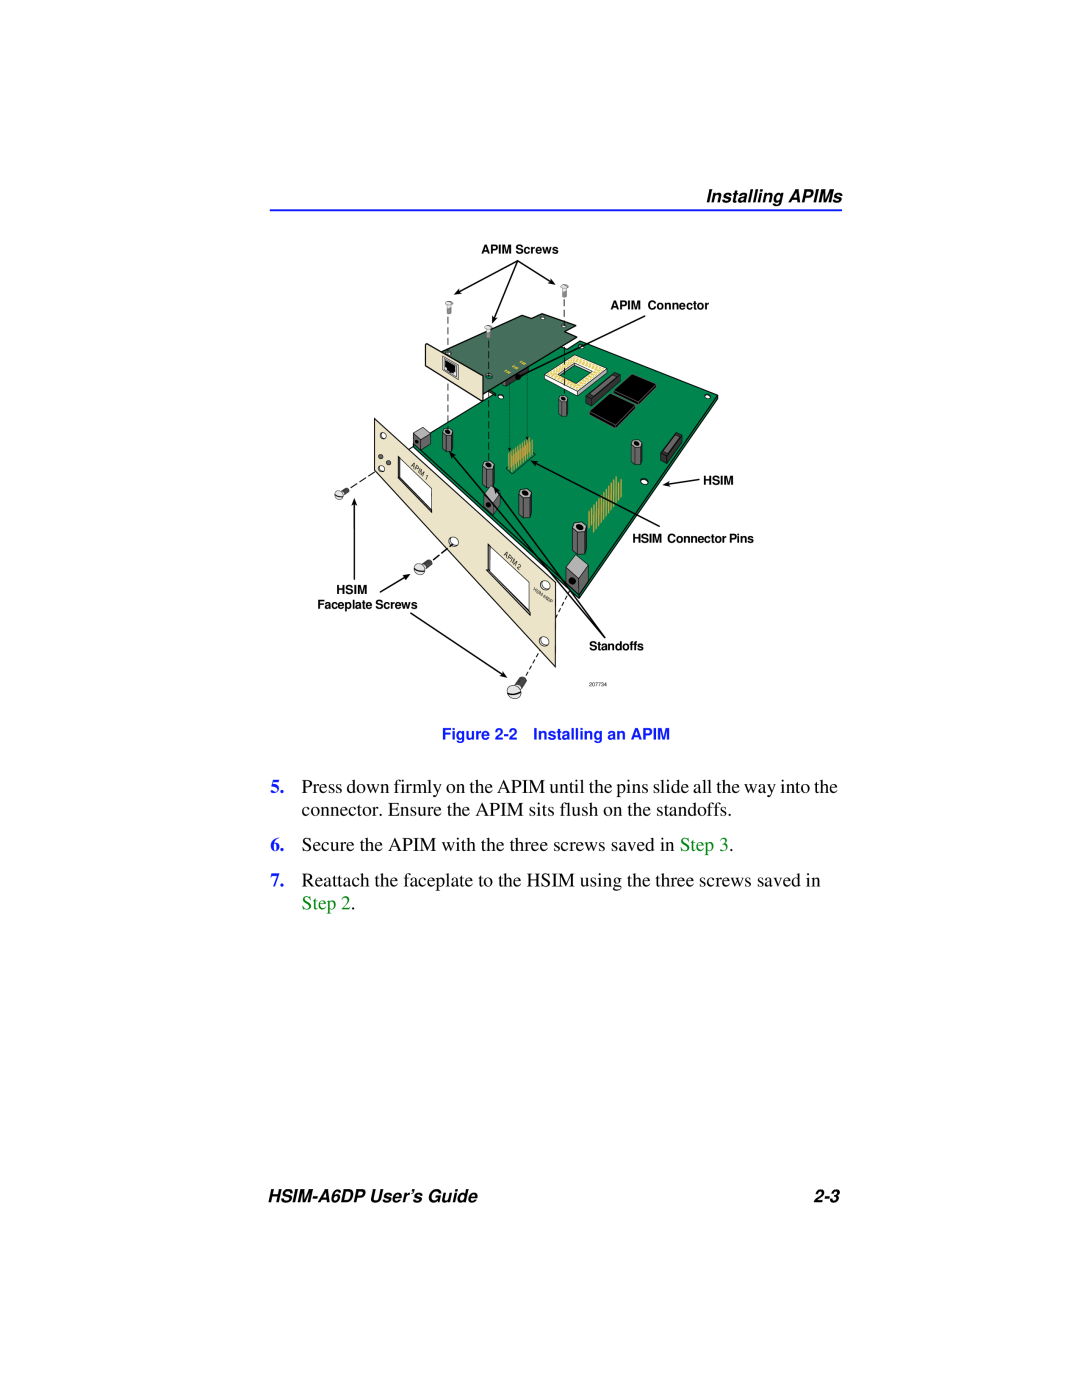 Cabletron Systems HSIM-A6DP manual Secure the APIM with the three screws saved in Step 